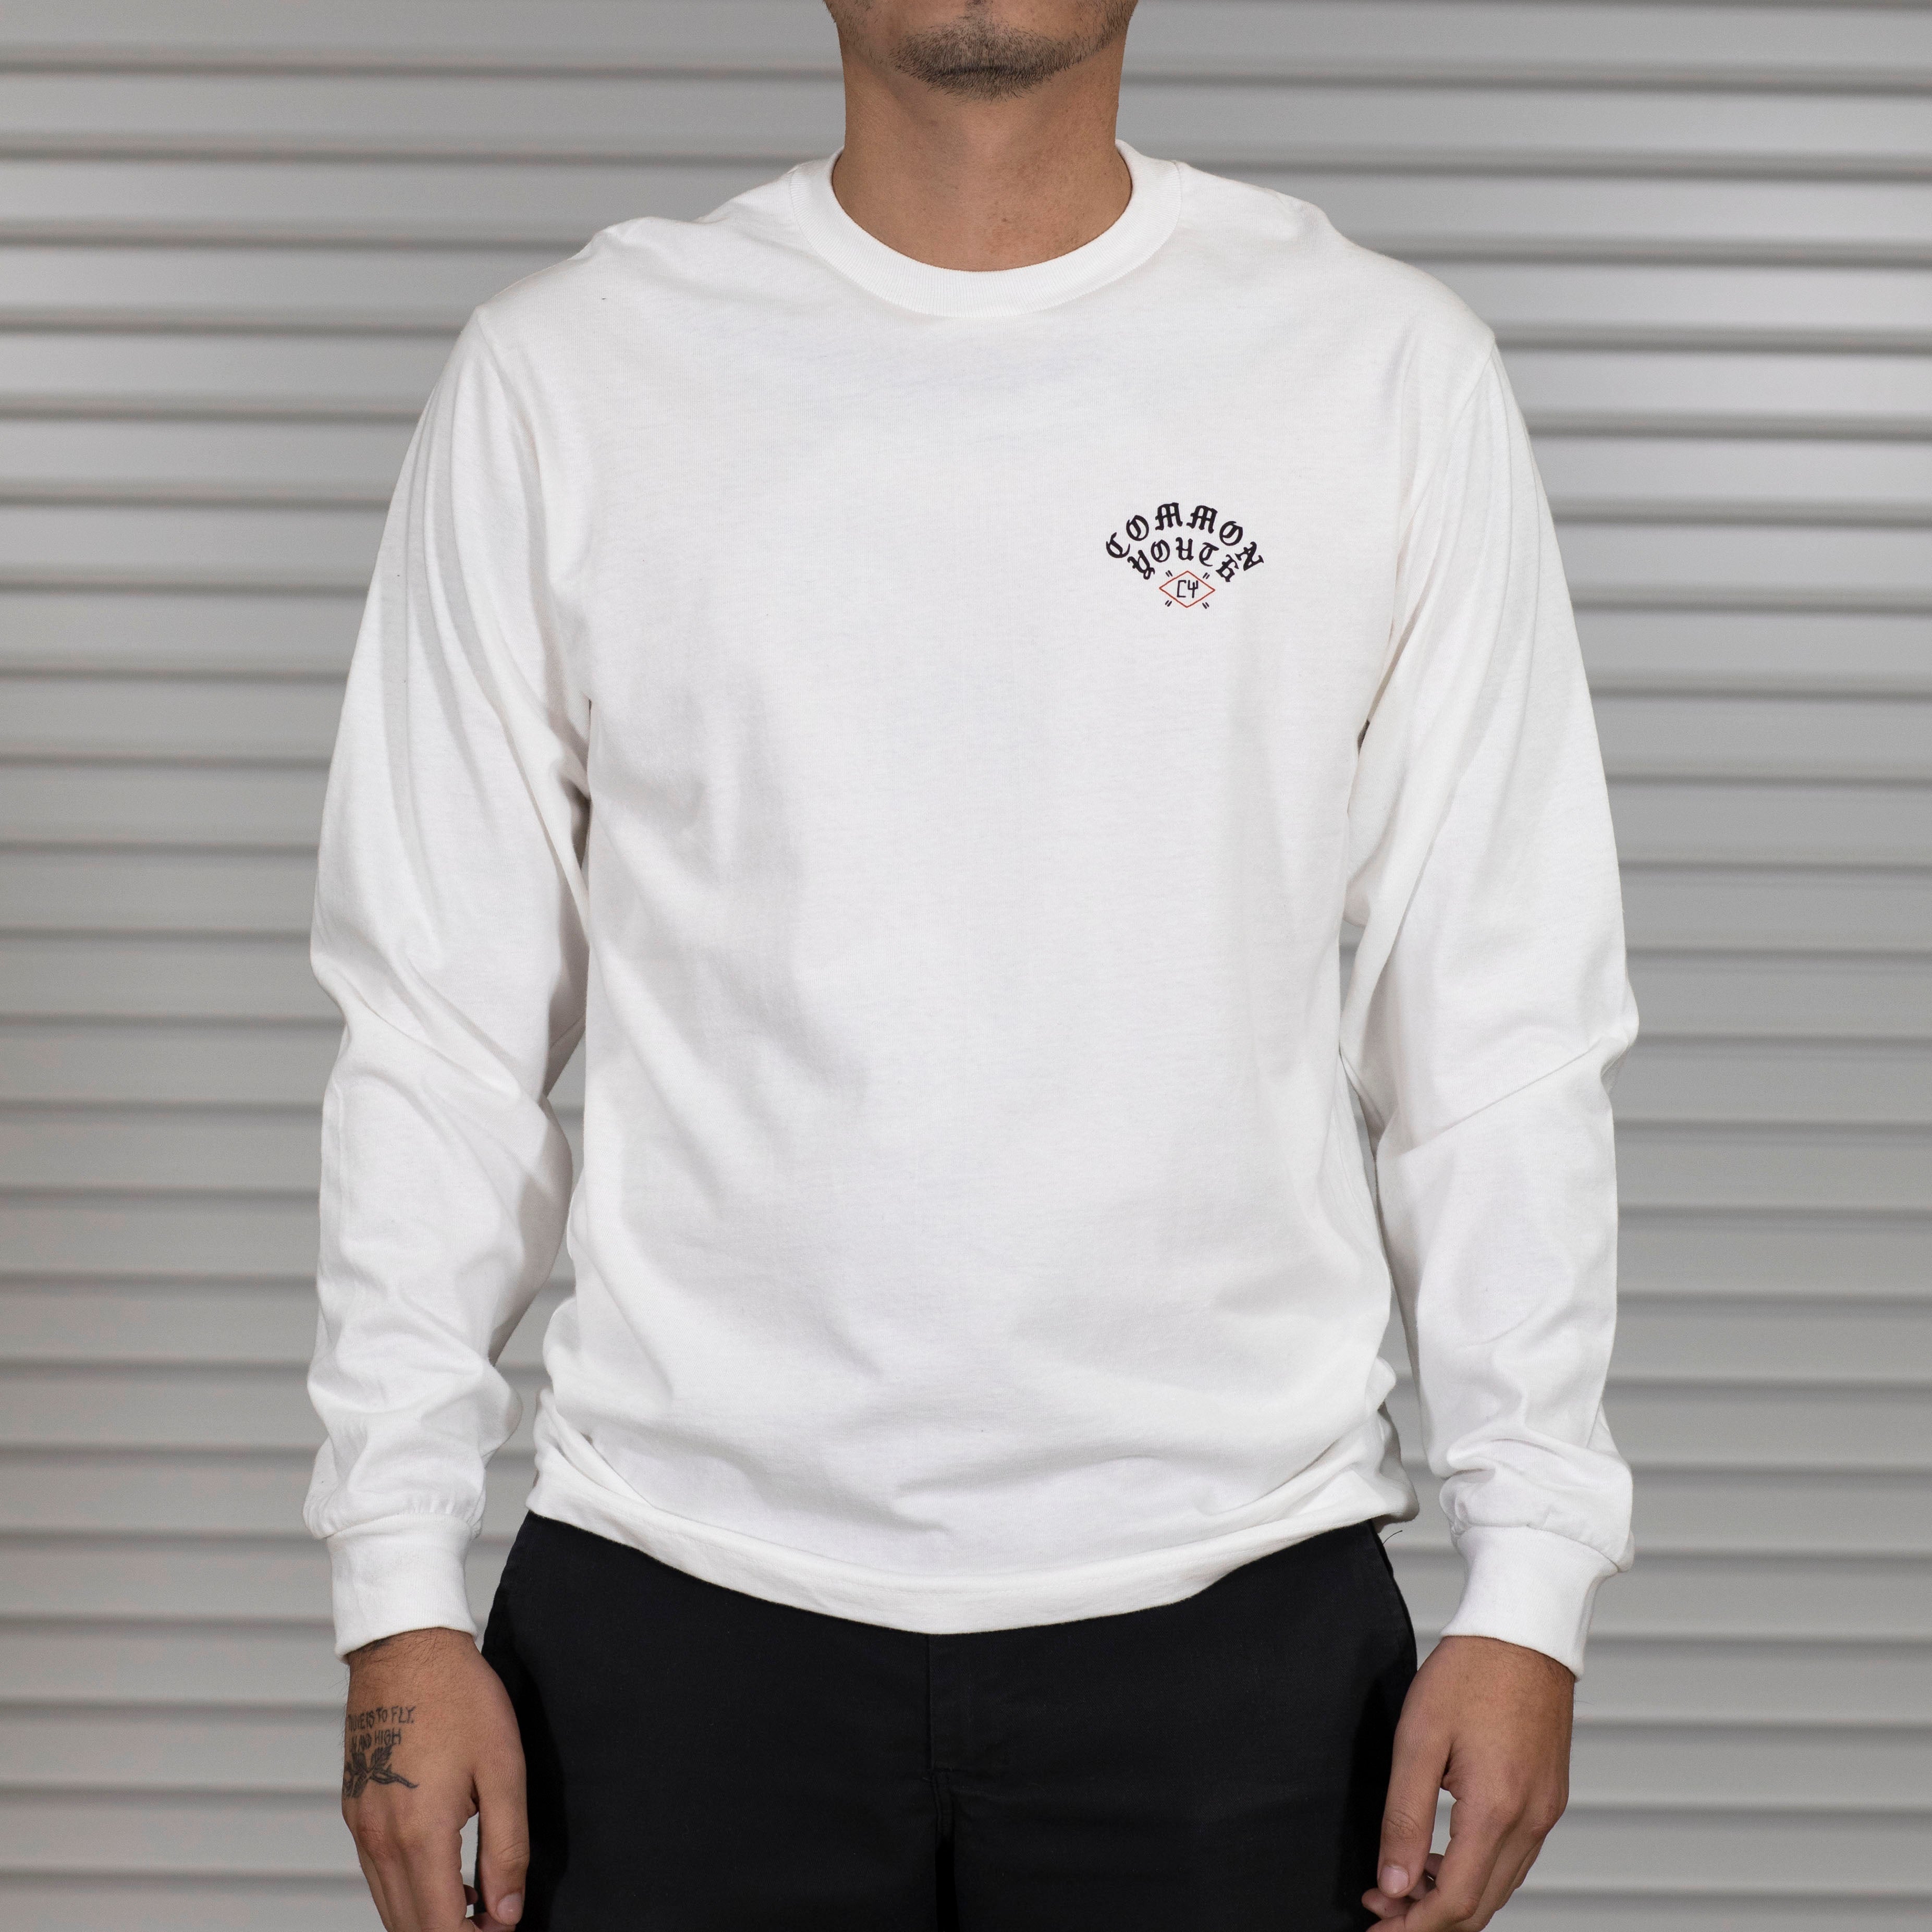 CHAIN LINK LS - commonyouthbrand